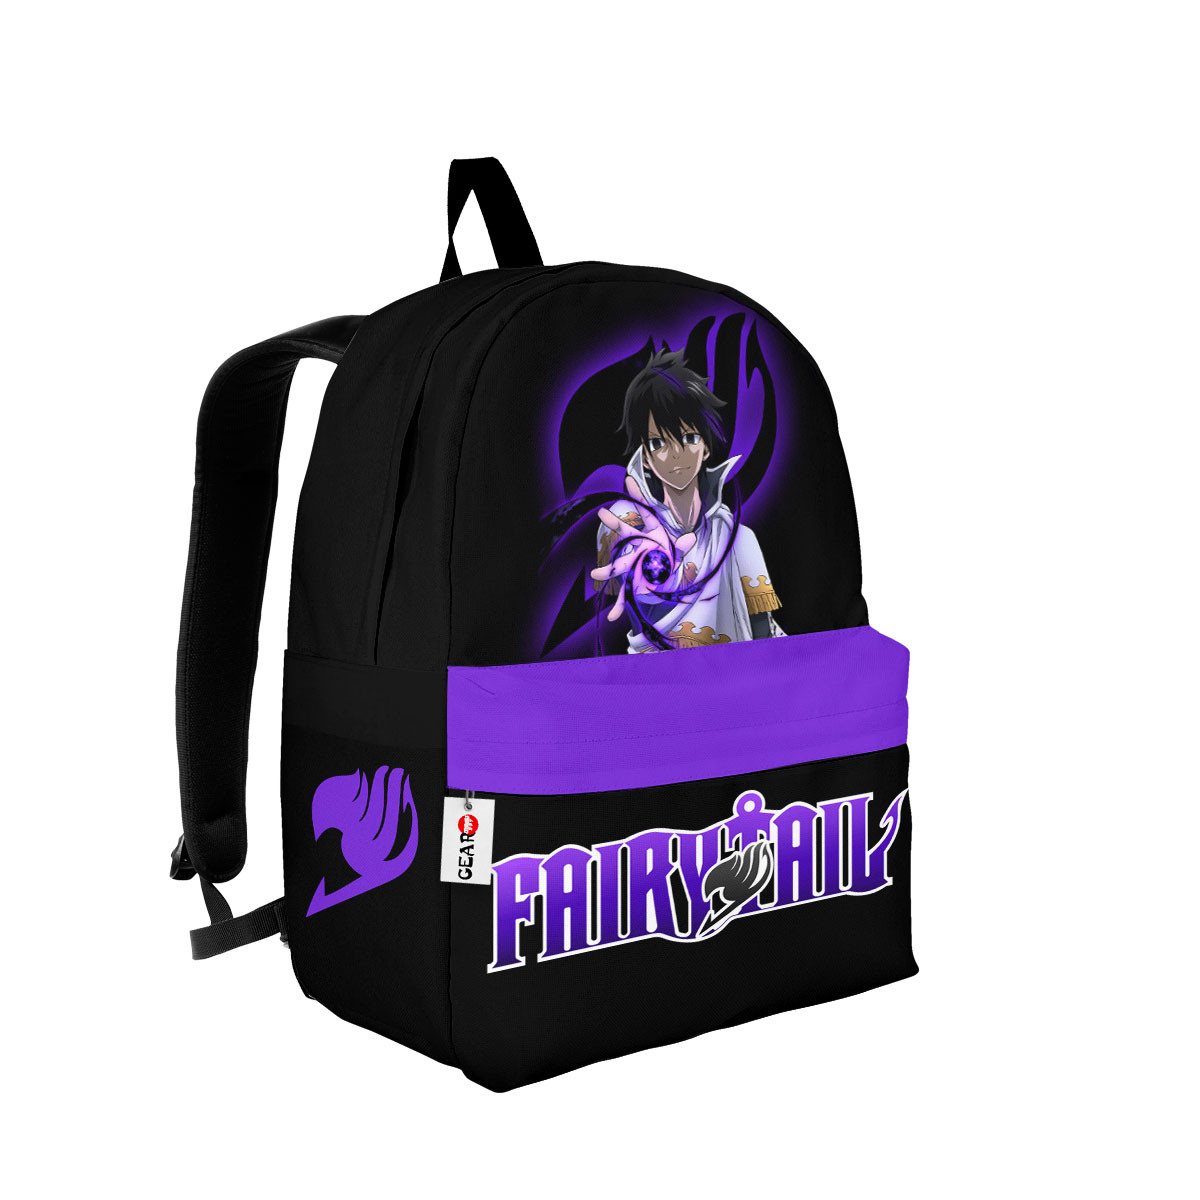 BEST Zeref Fairy Tail Anime Backpack Bag2